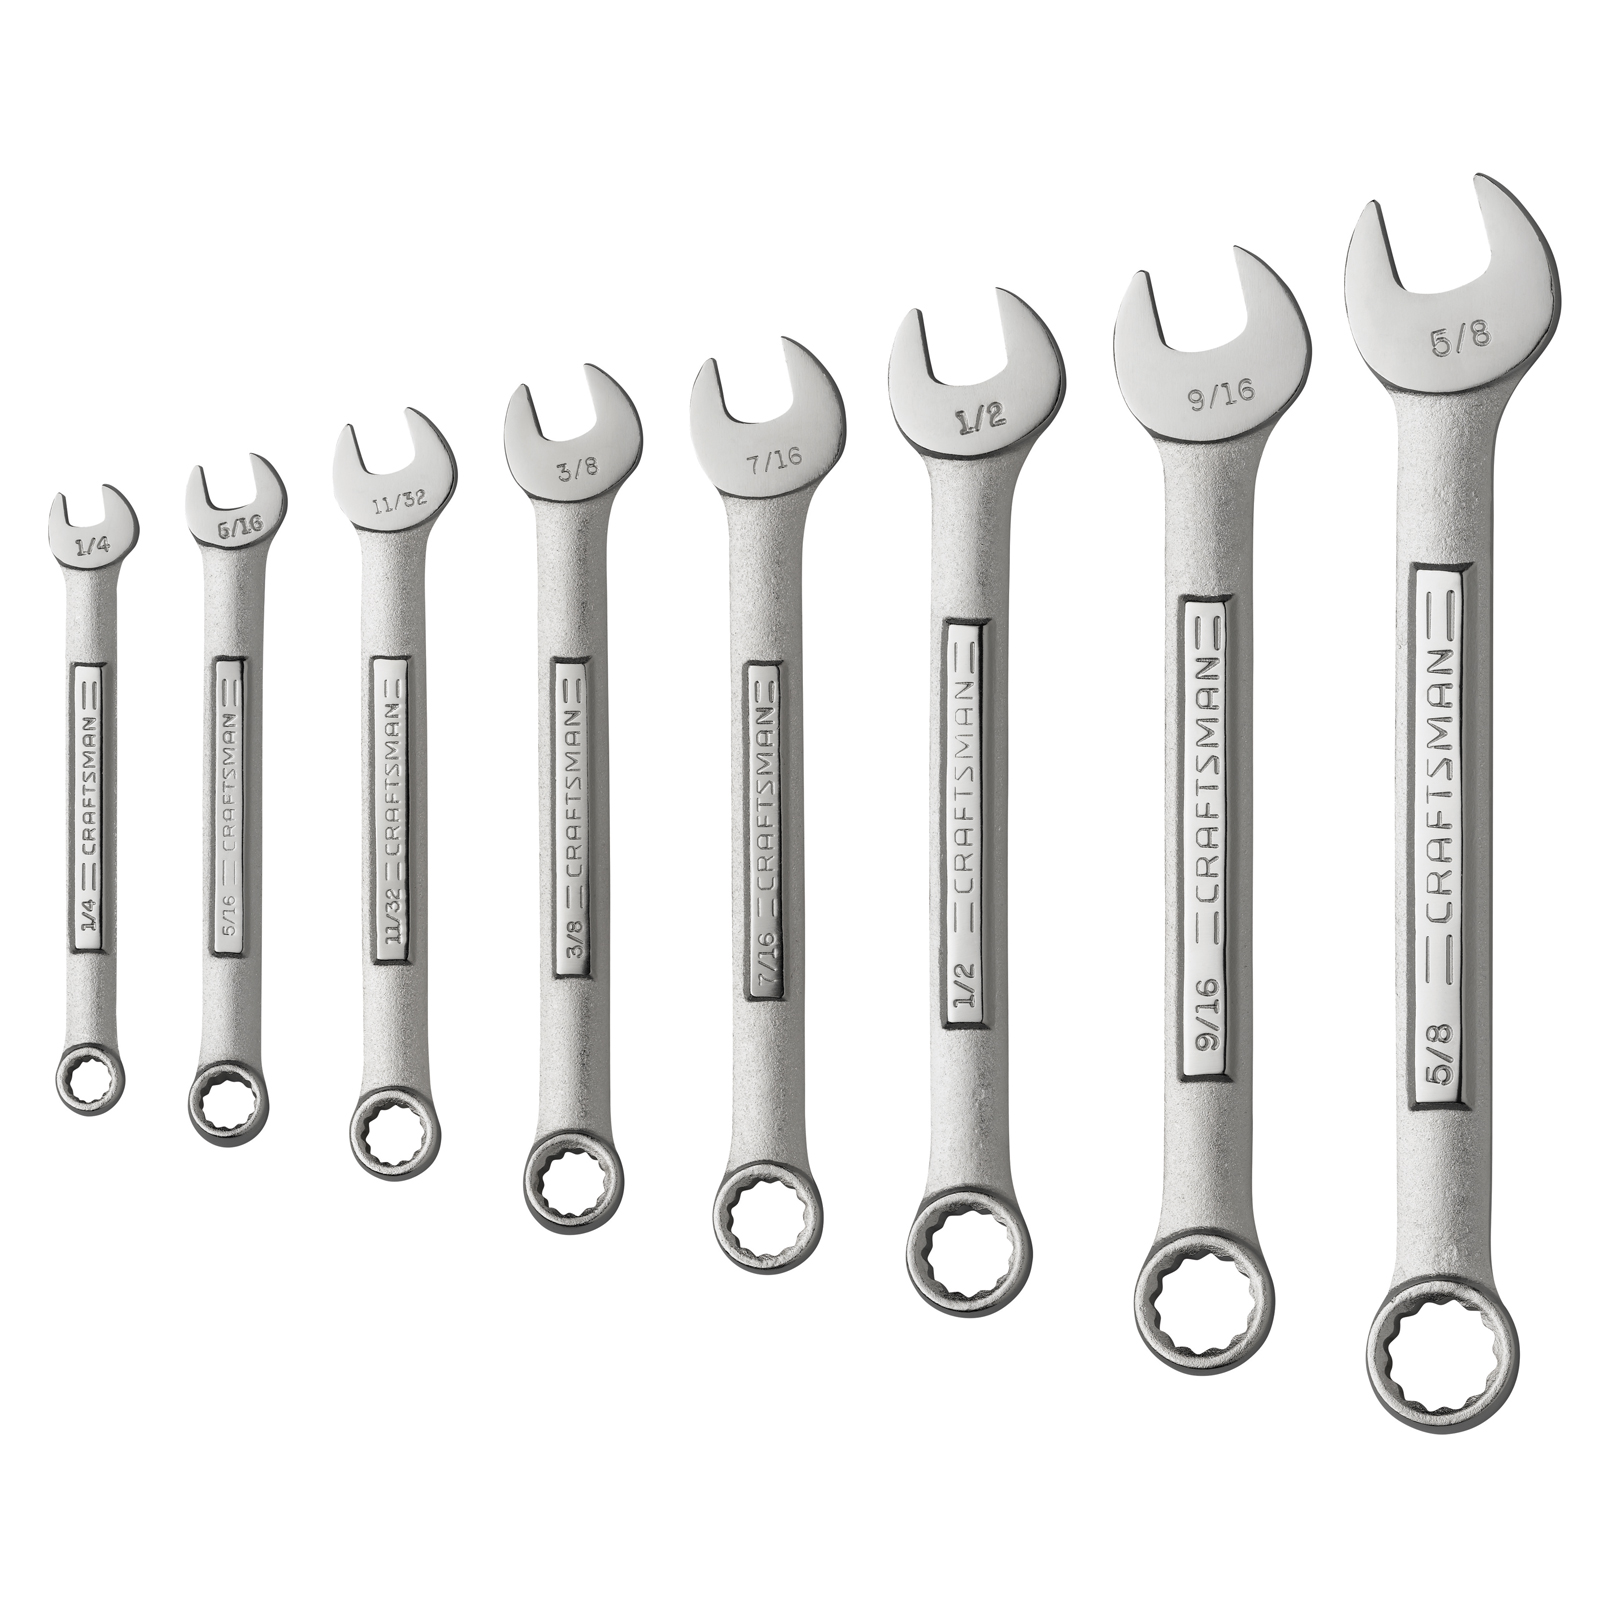 Craftsman 8 pc. Combination Wrench Set